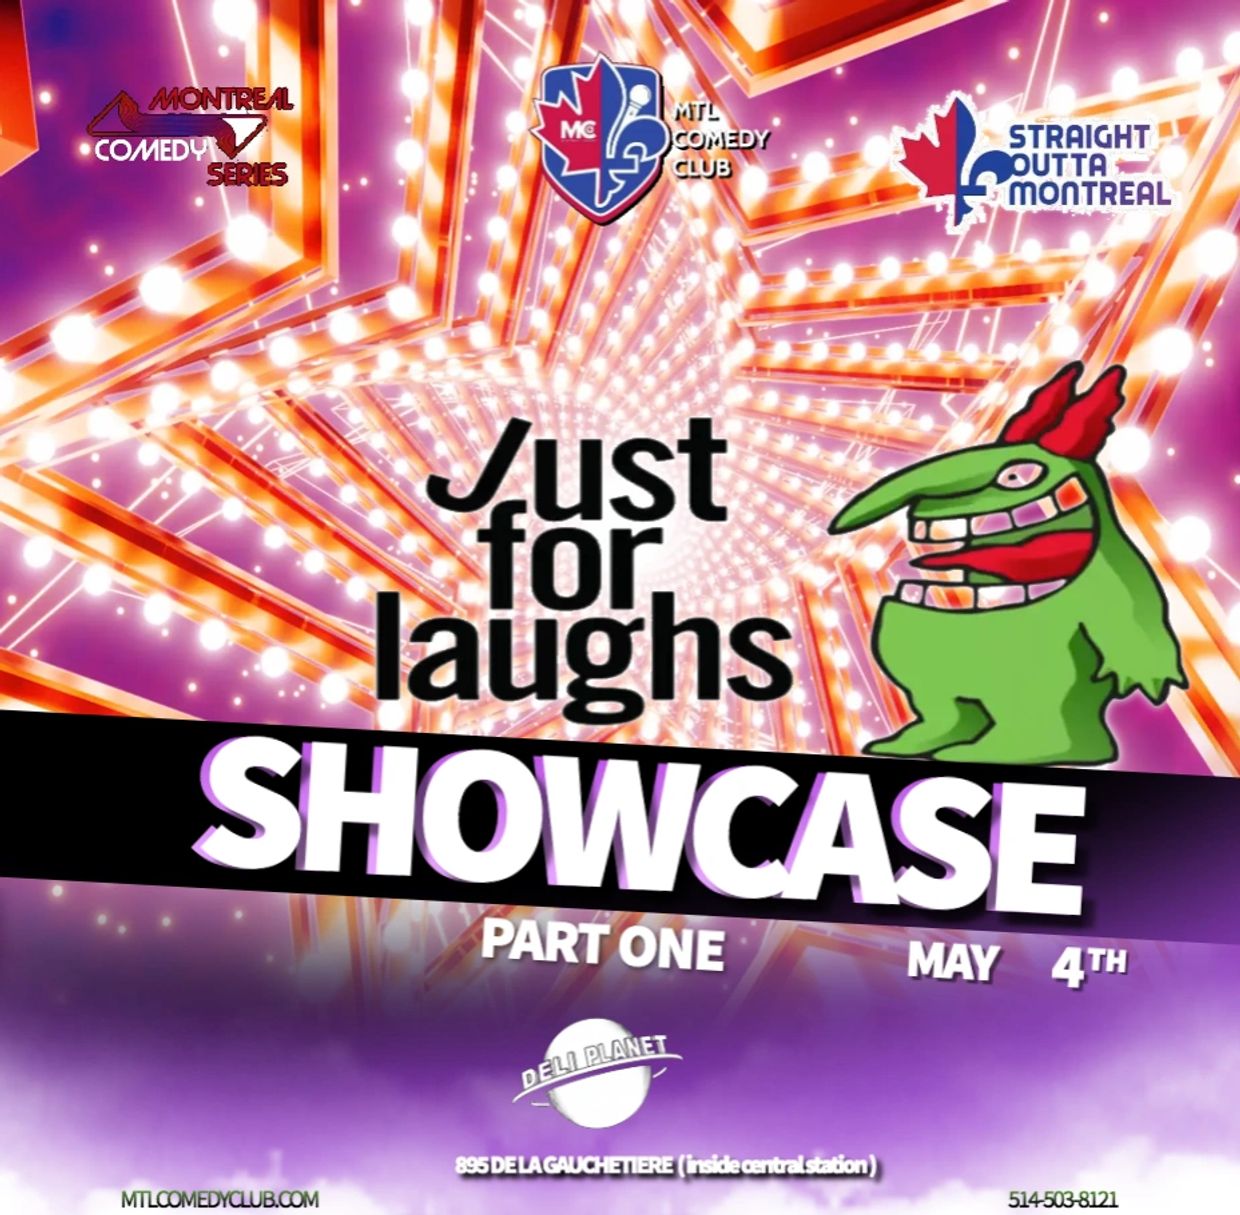 Just For Laughs Auditions in The Heart Of Downtown Montreal. A Montreal Comedy Show by MTLCOMEDYCLUB